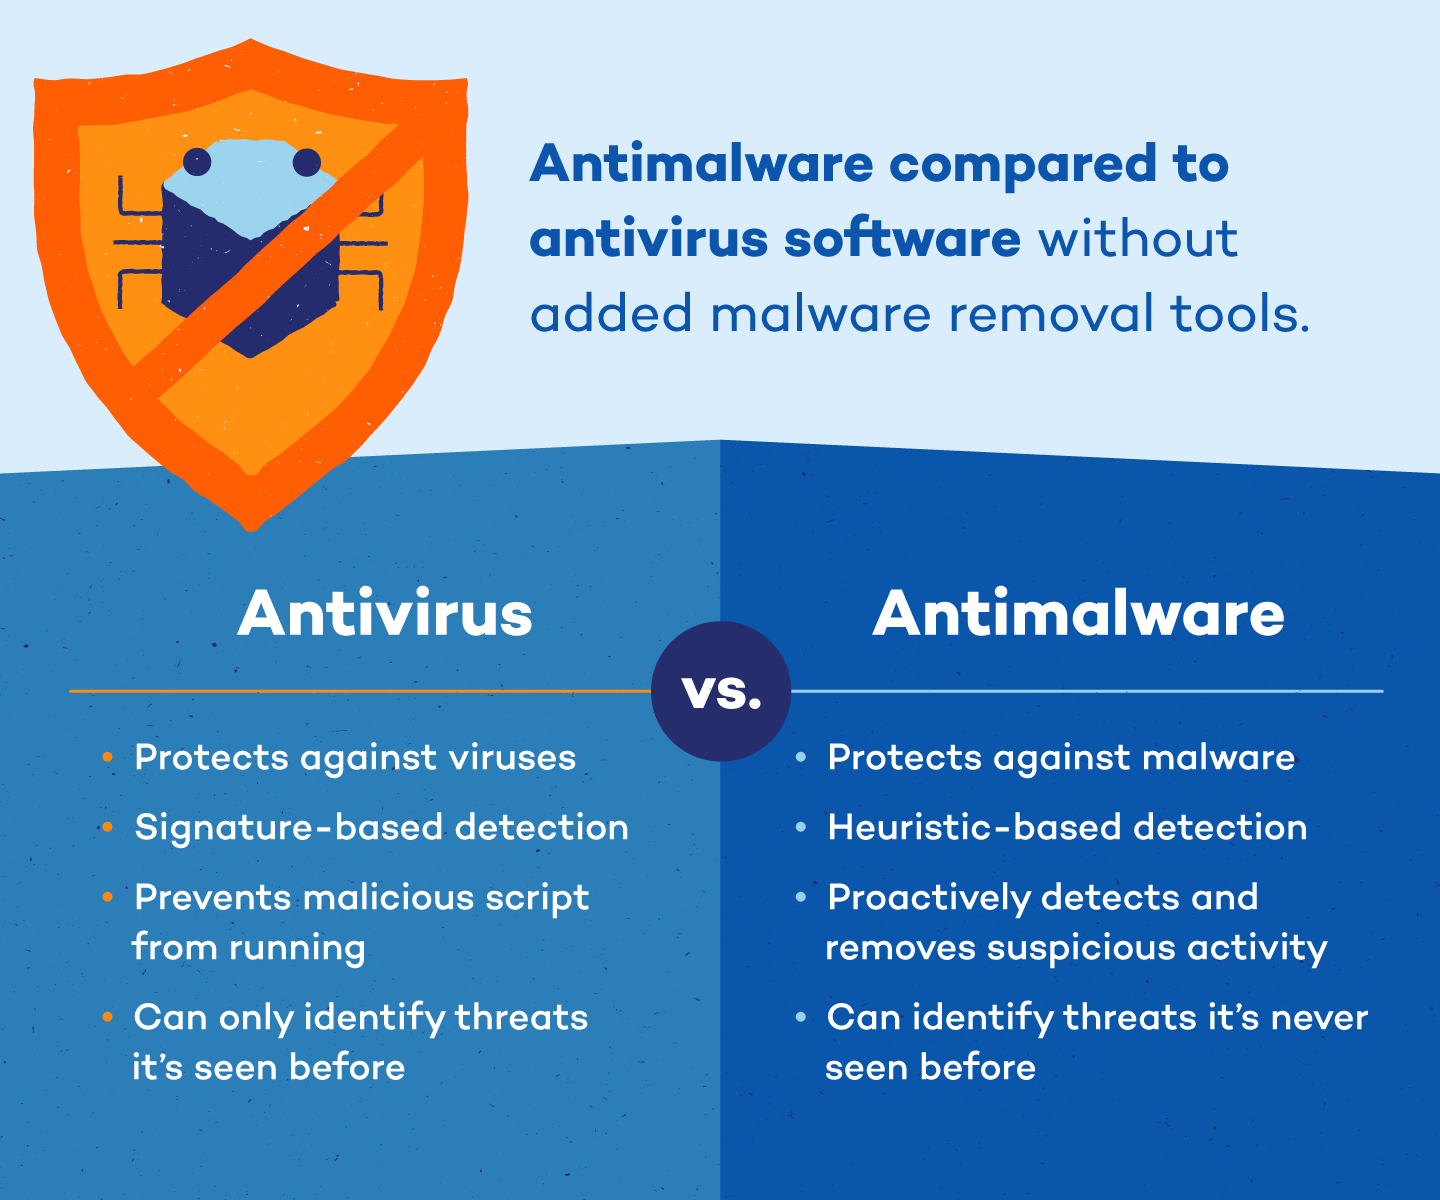 Install a reliable antivirus or antimalware program if you don't have one.
Update the antivirus/antimalware program to ensure the latest virus definitions.